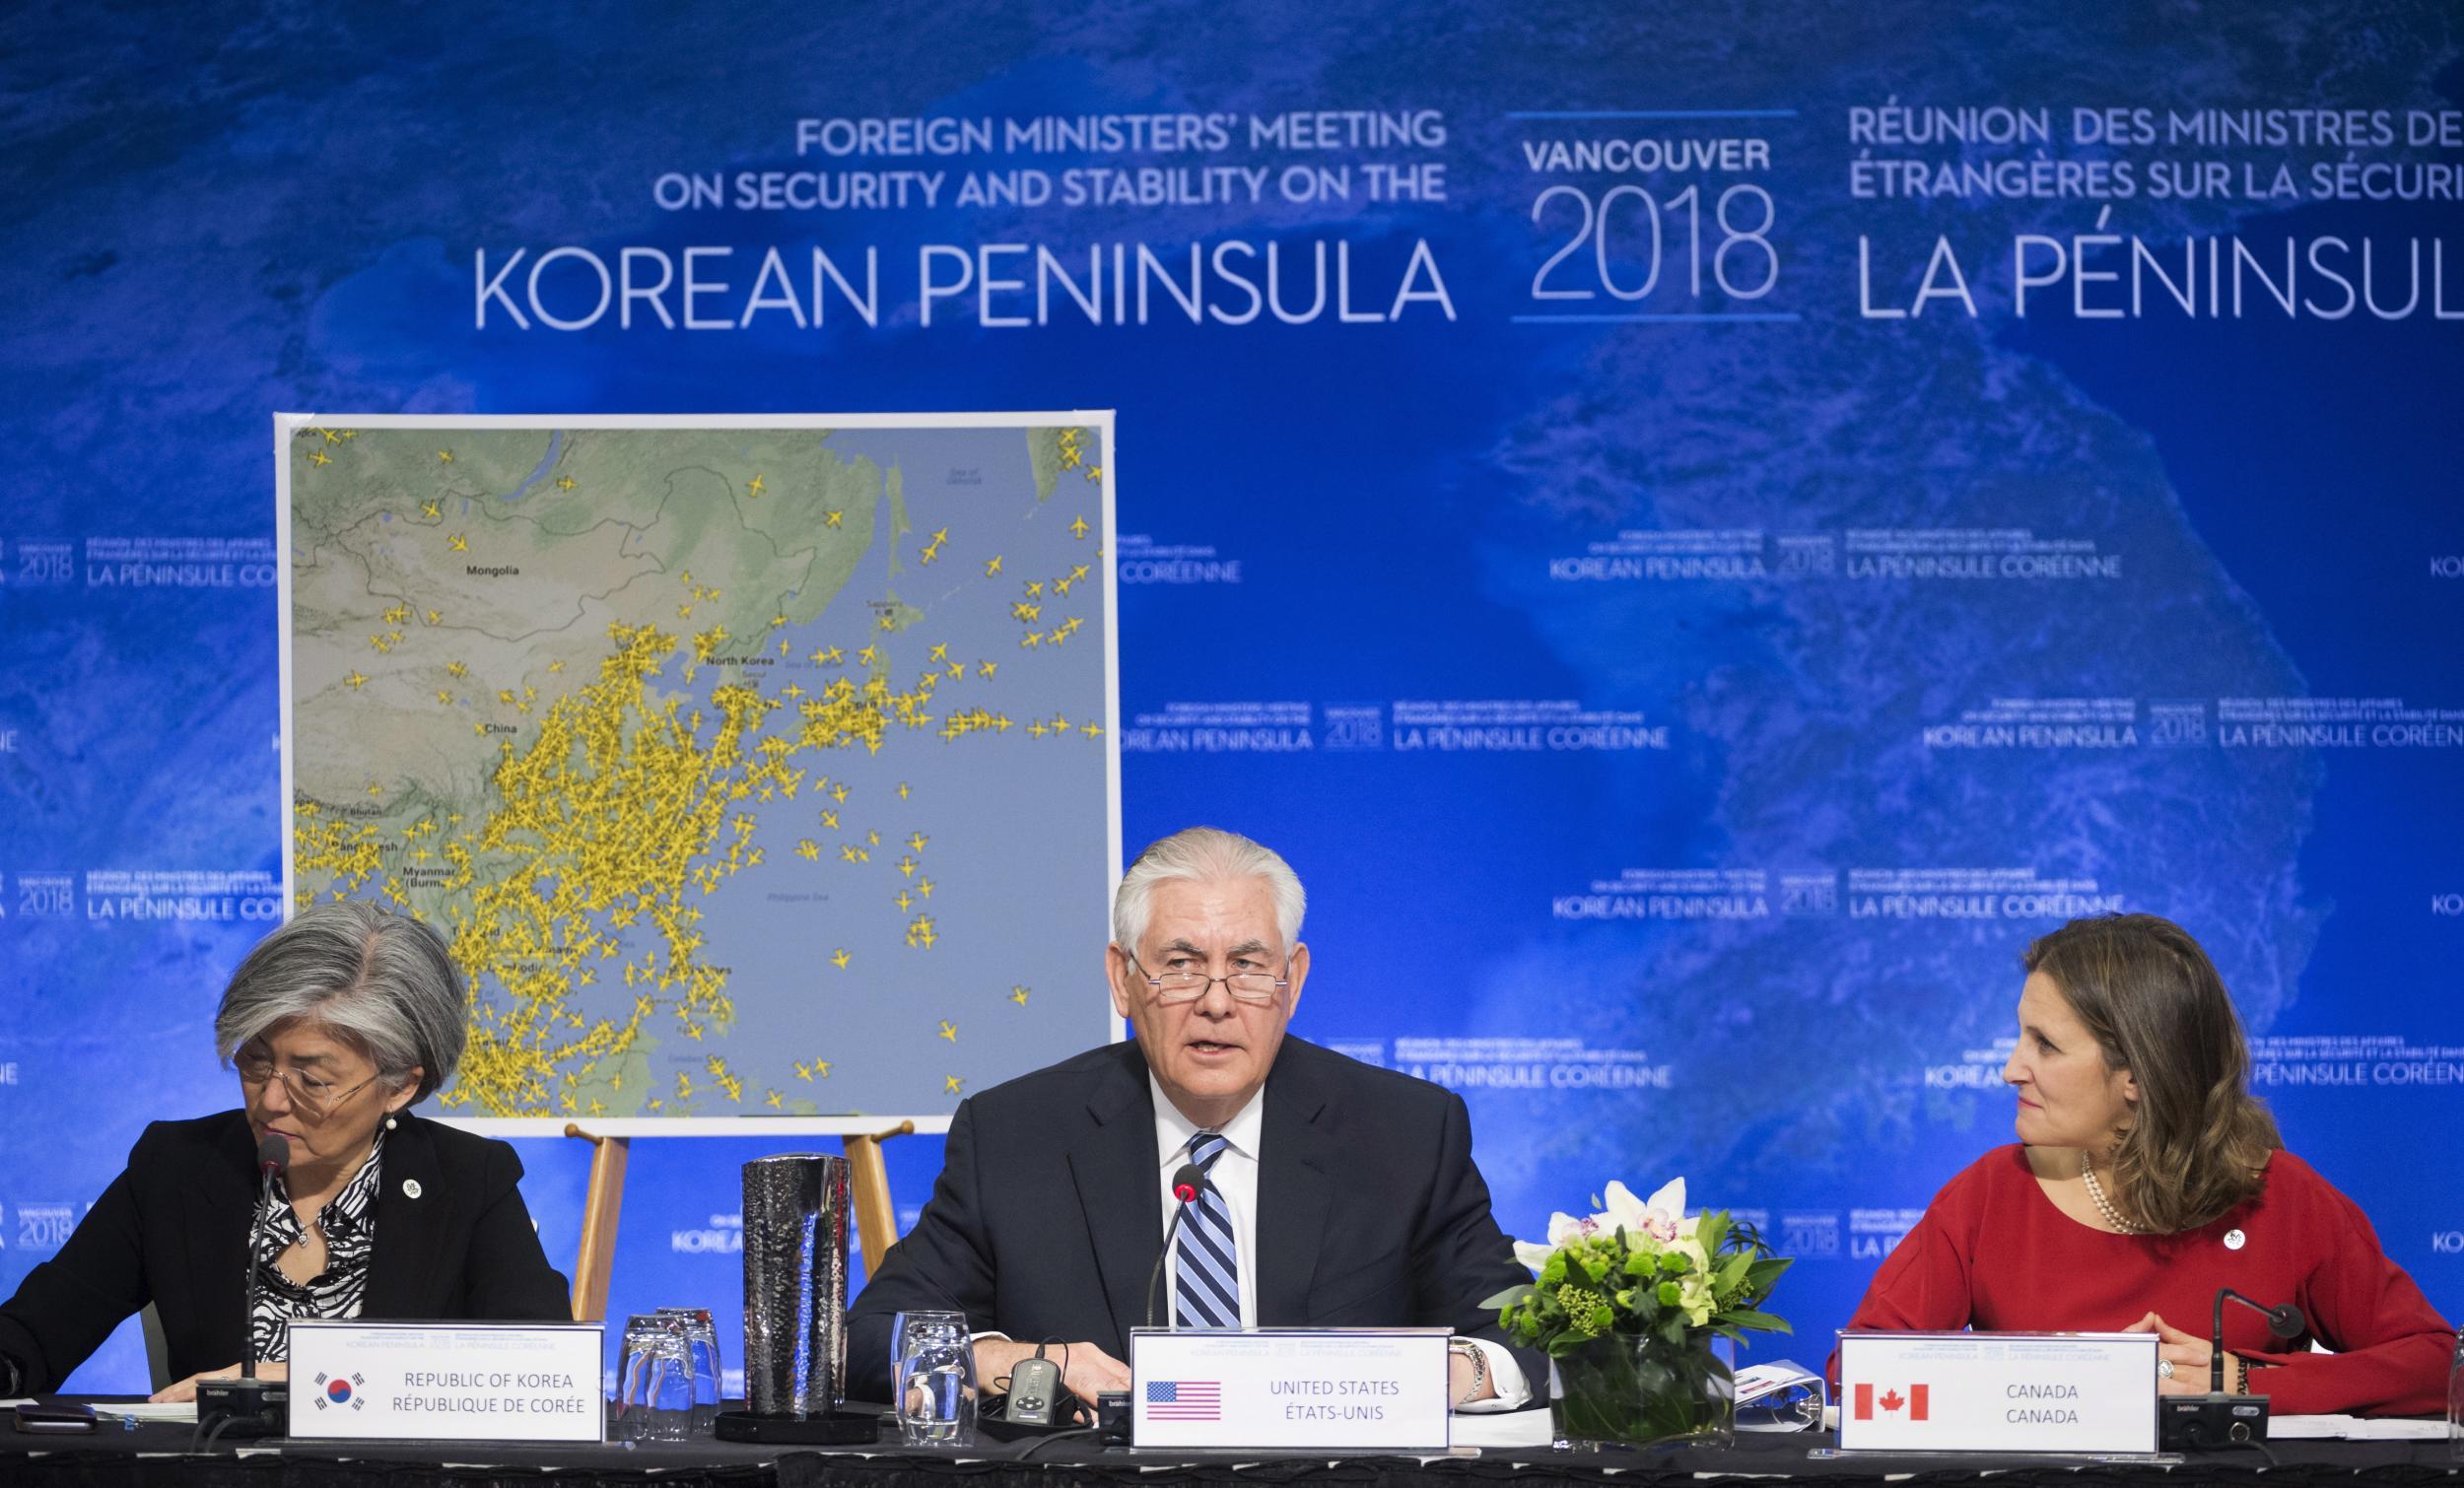 Canadian Foreign Affairs Minister Chrystia Freeland and South Korean Foreign Minister Kang Kyung-wha listen as US Secretary of State Rex Tillerson speaks during a meeting on North Korea